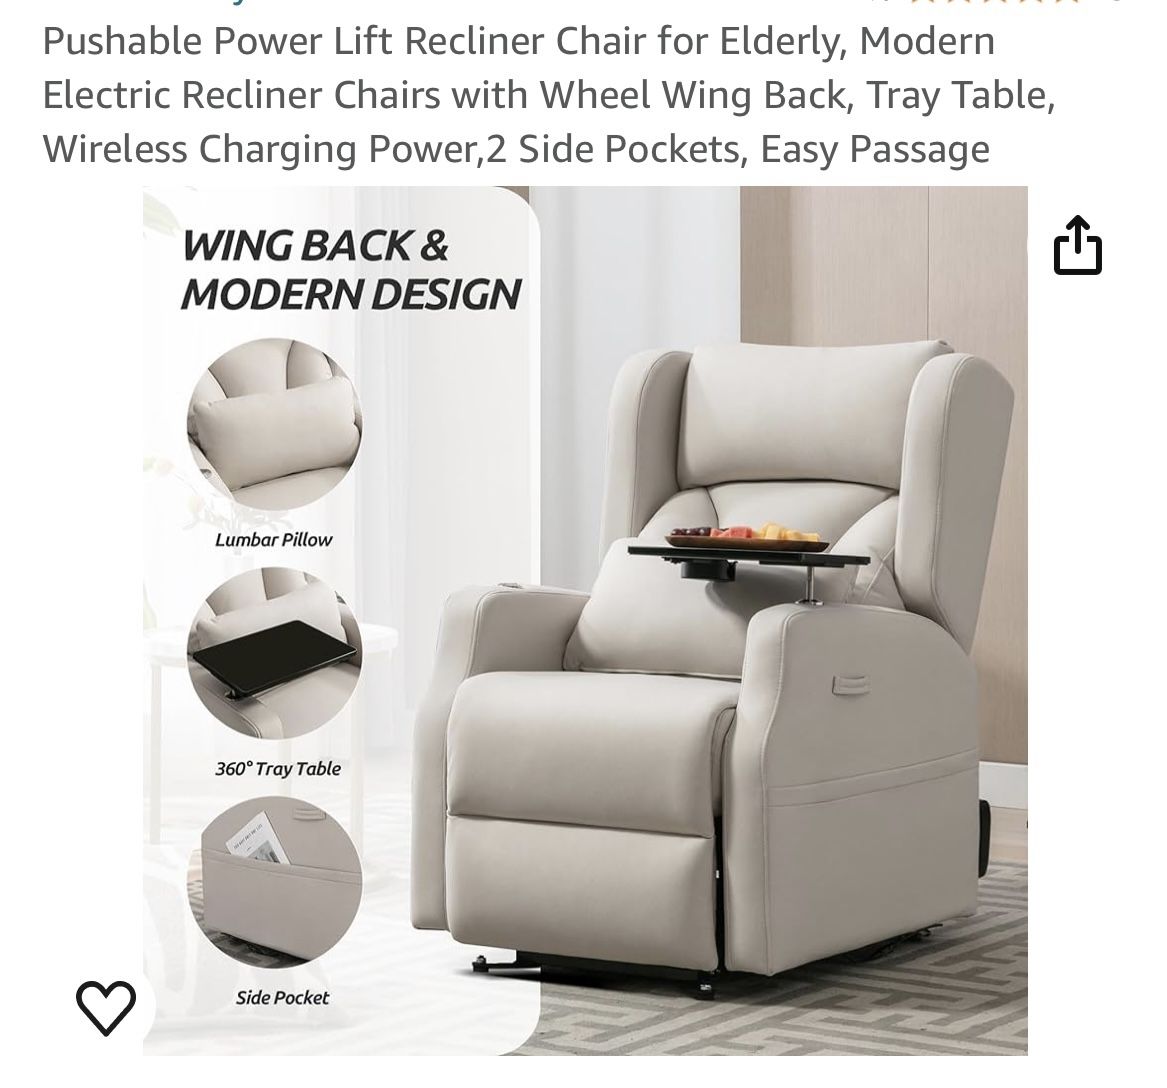 New In Box Akeysous Electric Power Lift Recliner Chair